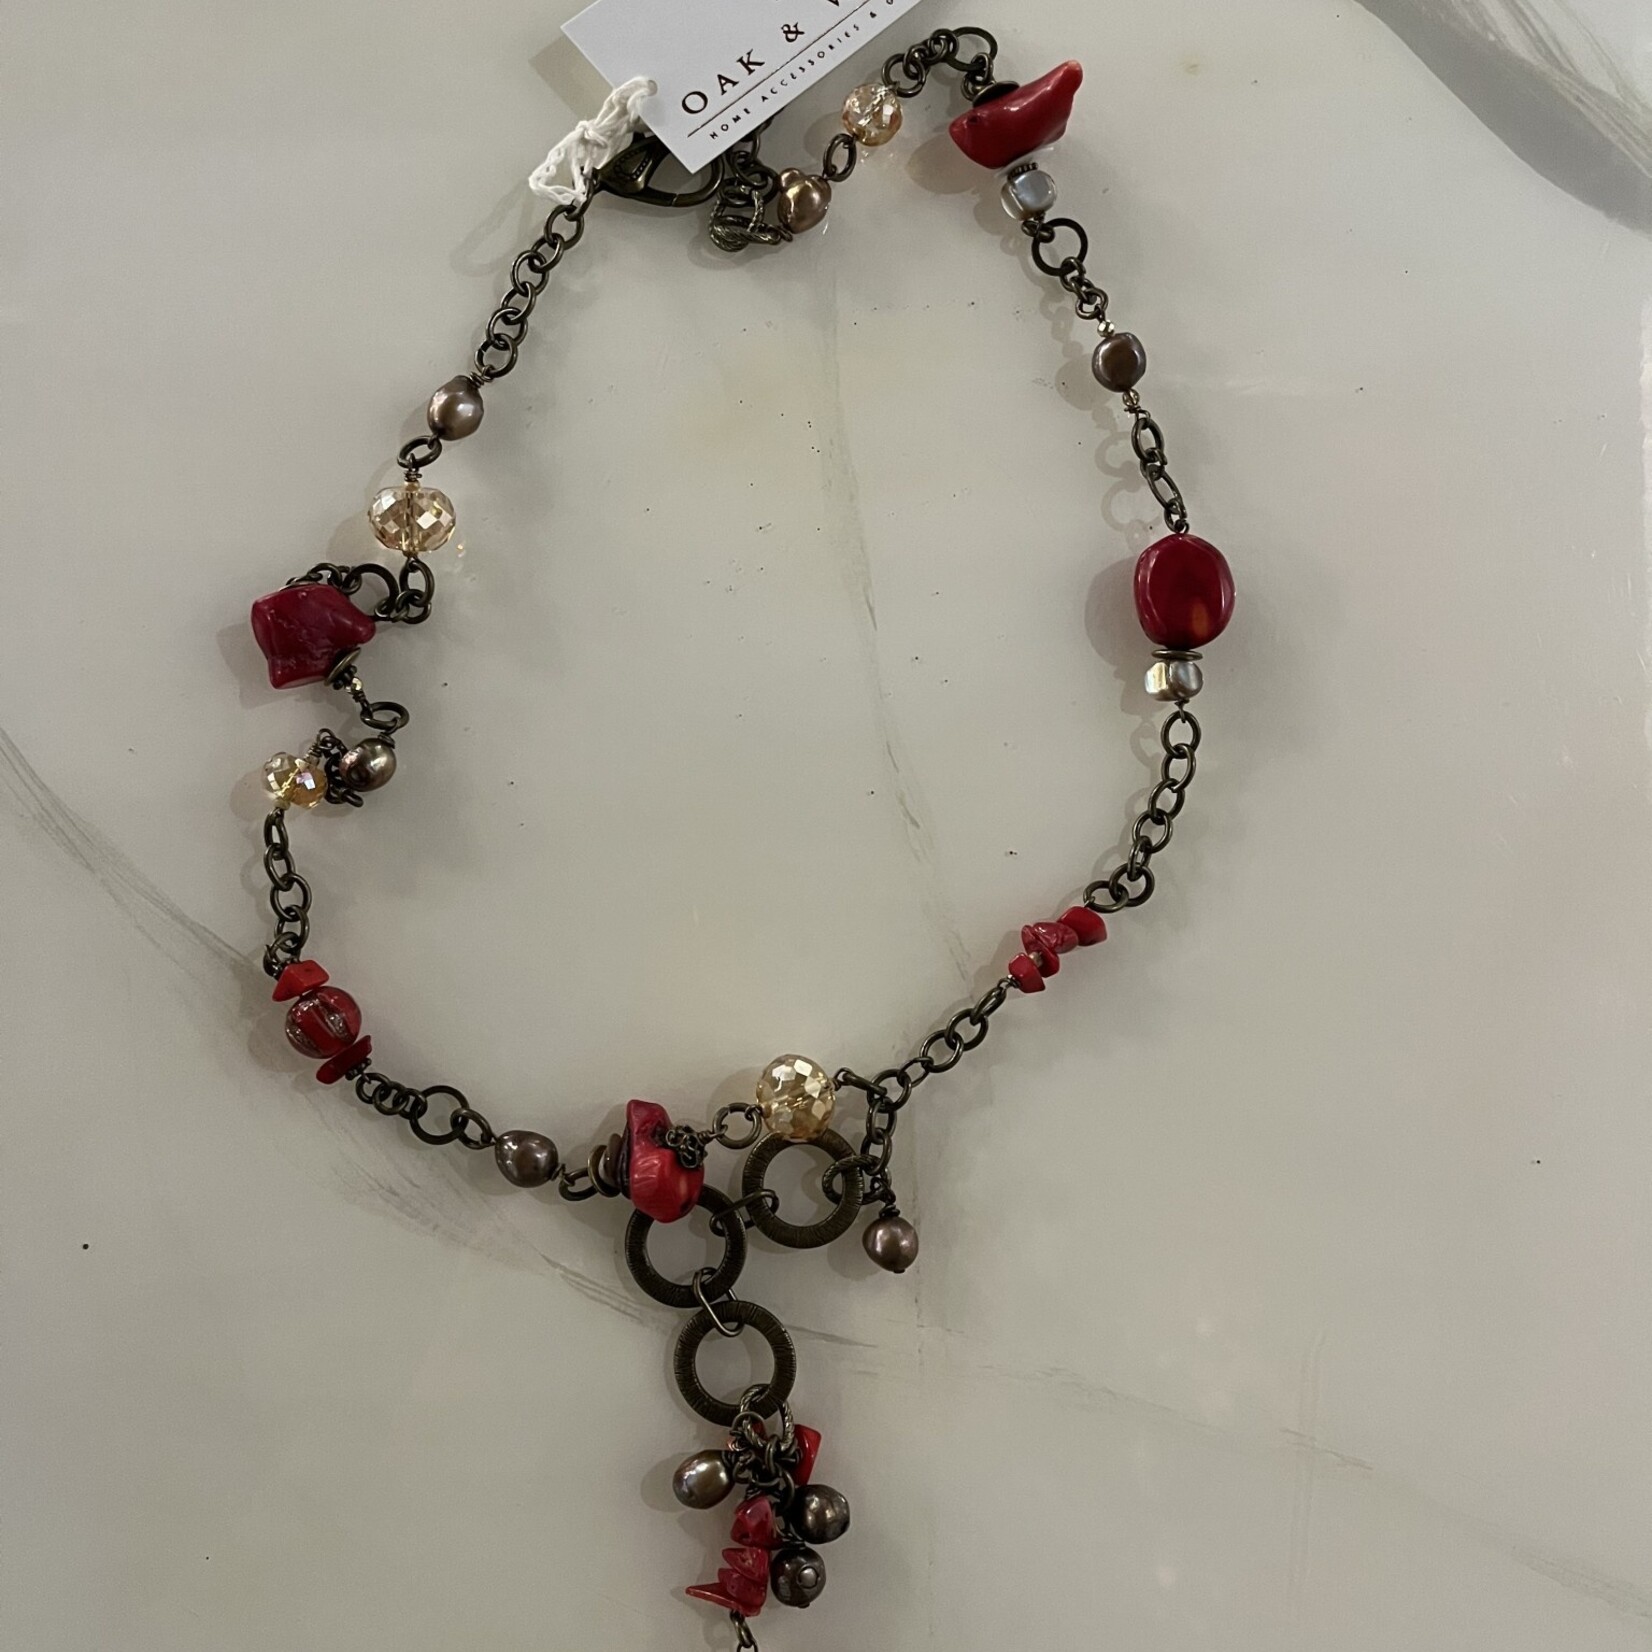 Alecia Bristow Hand Made - Natural Stone, Coral, Brown Pearls, Bronze Chain, Crystals